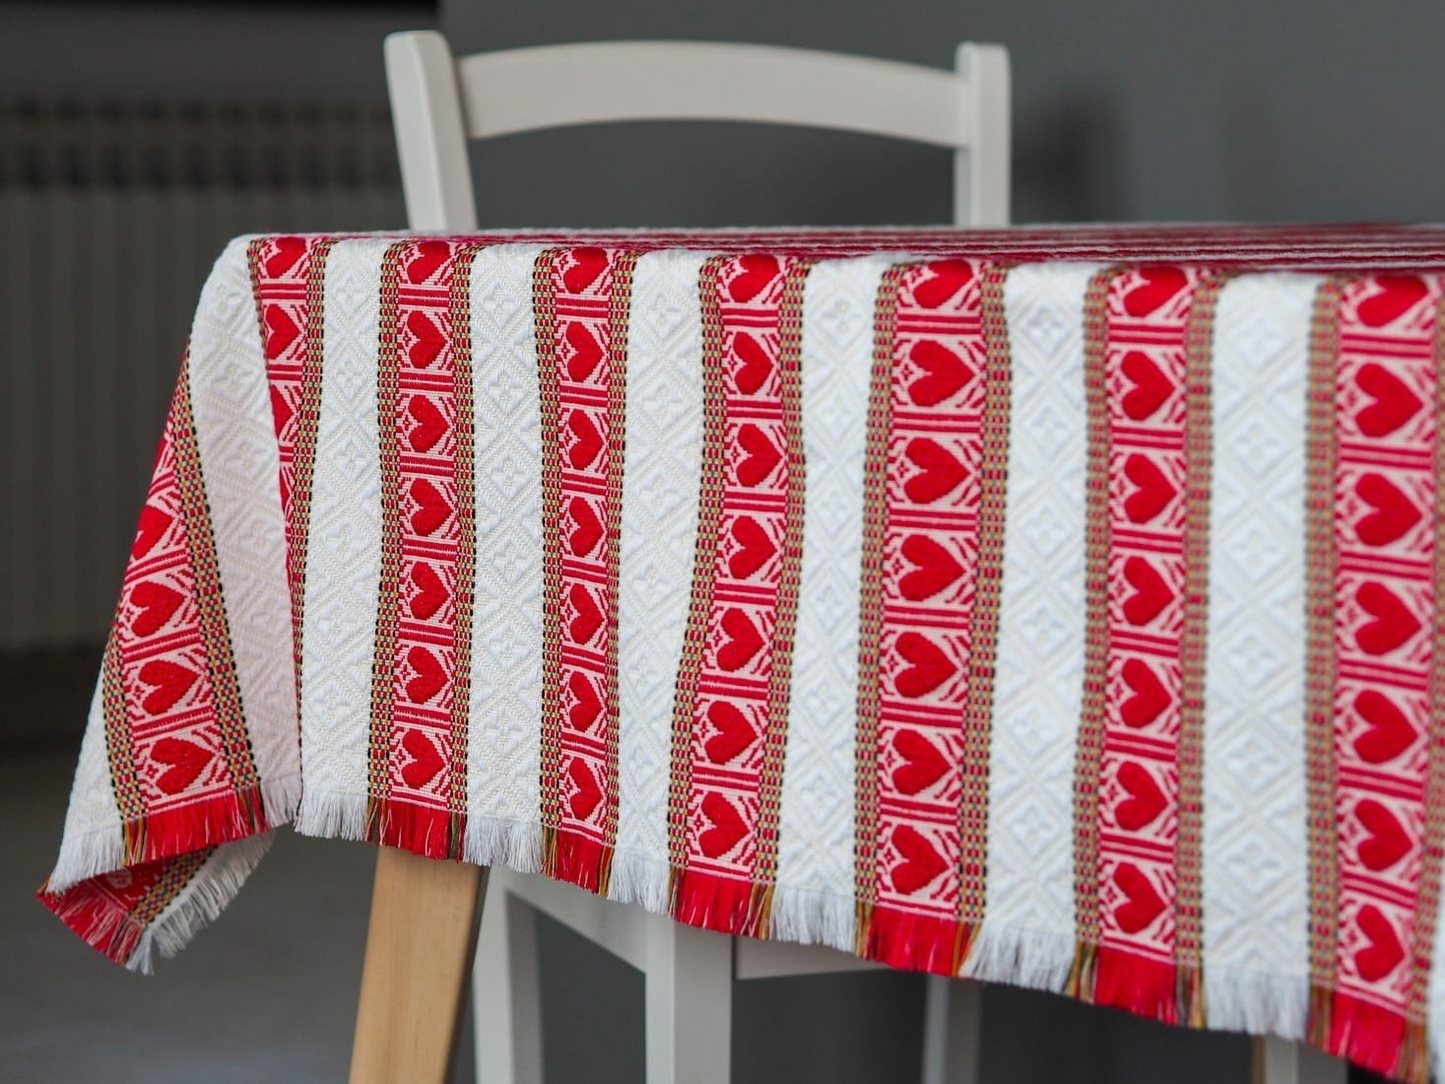 Croatian Red and White Tablecloth